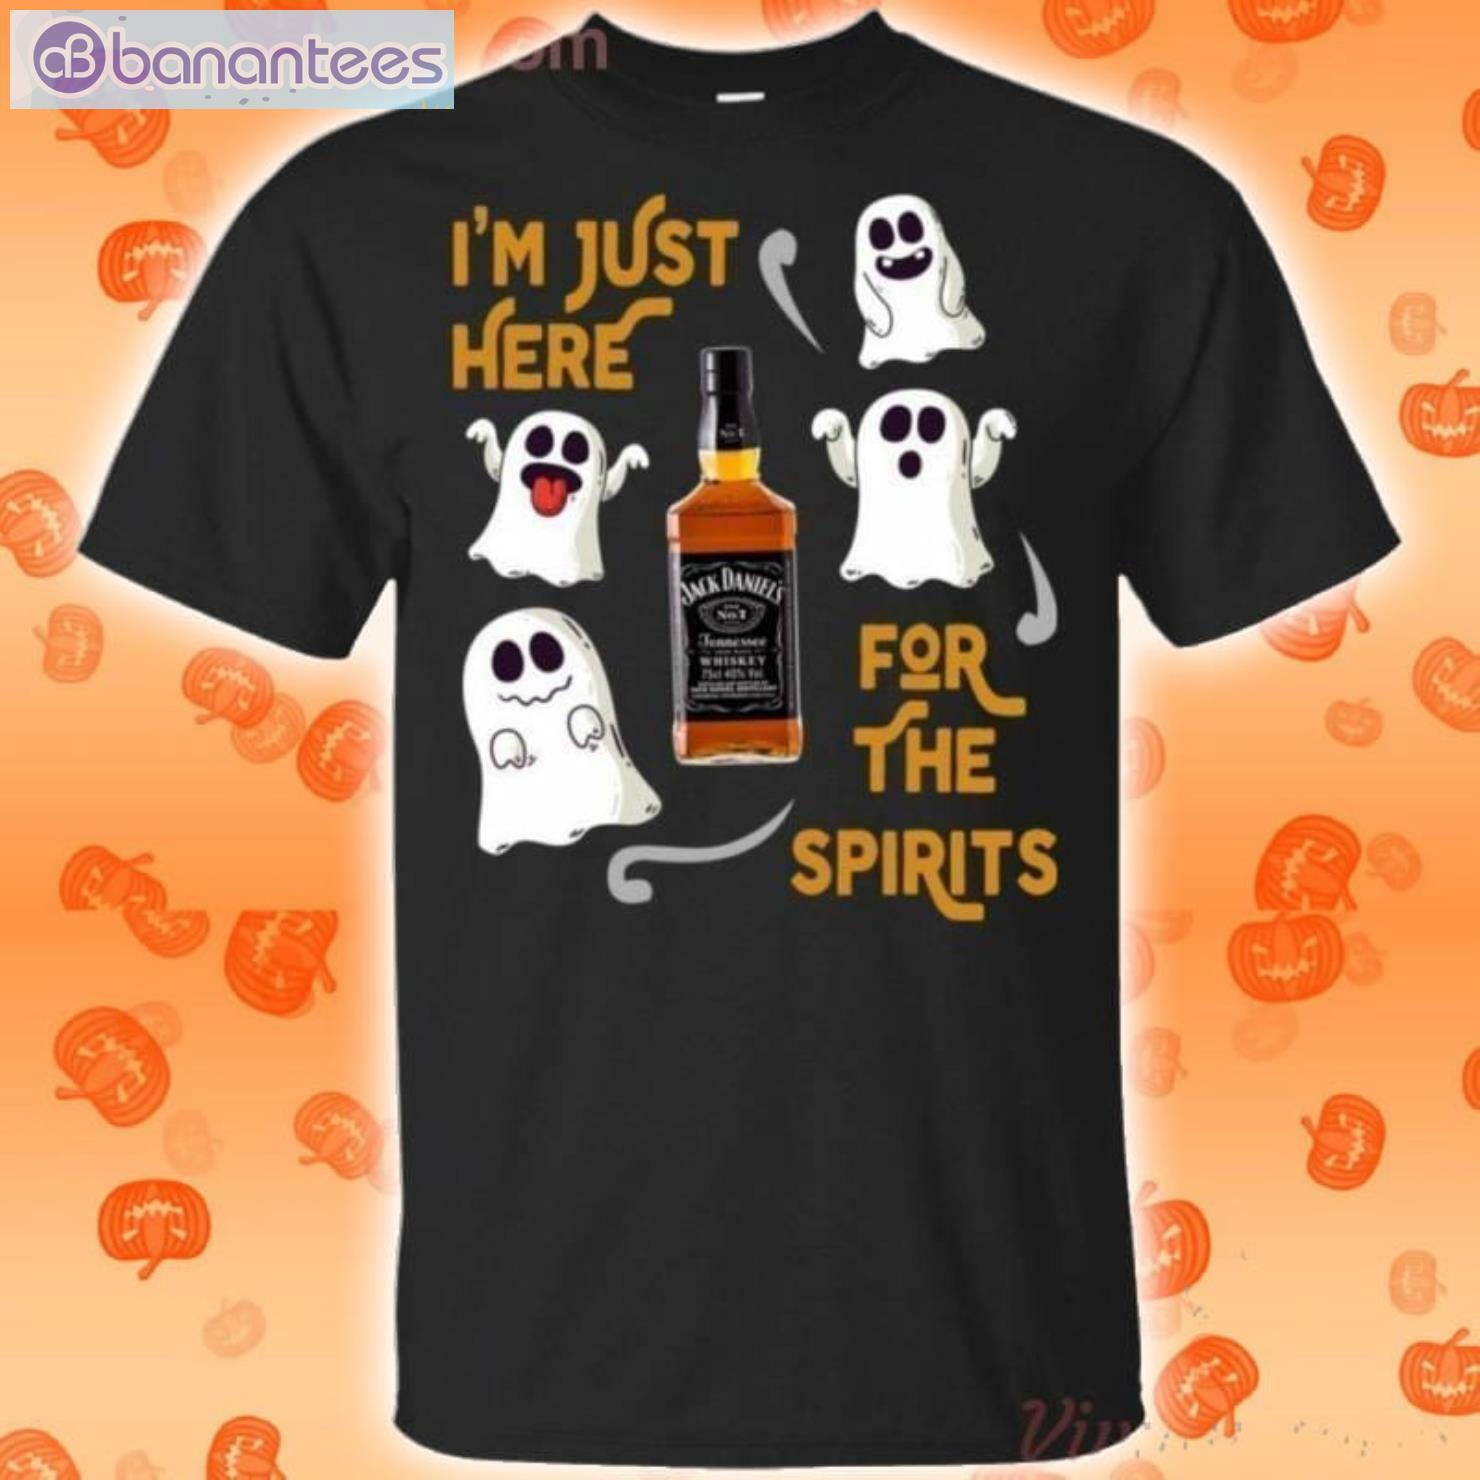 I'm Just Here For The Spirits Jack Daniel's Halloween T-Shirt Product Photo 1